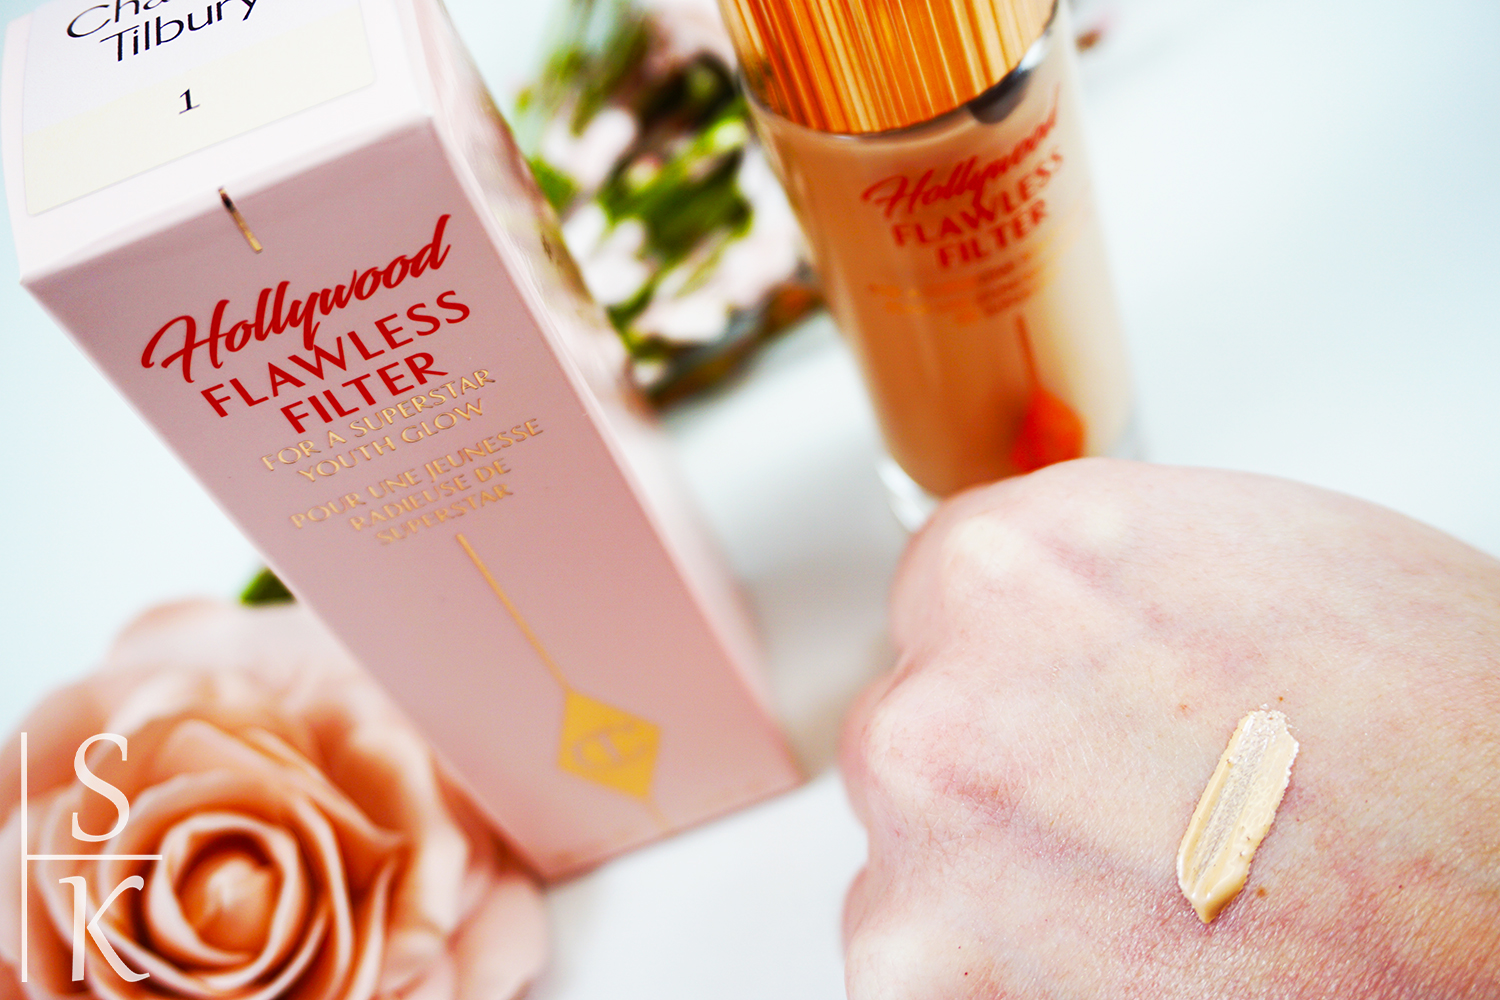 Charlotte Tilbury - Hollywood Flawless Filter, Review und Swatches @Horizont-Blog